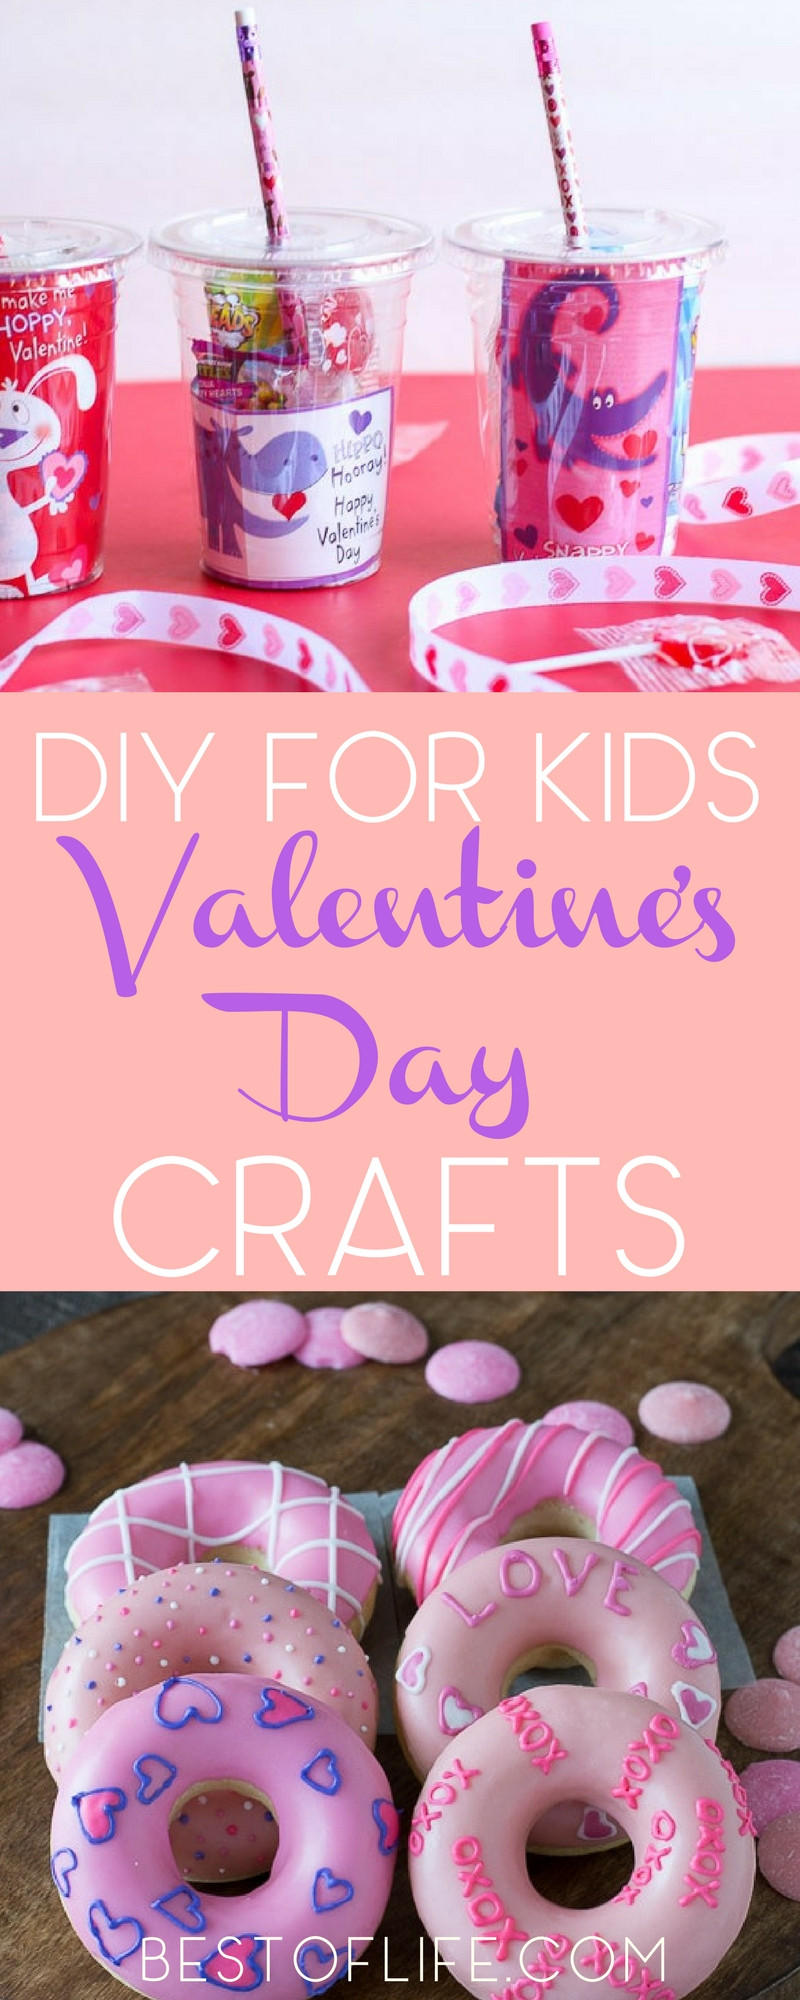 Valentine'S Day Craft Ideas For Adults
 35 DIY Valentines Day Crafts for Kids that Will Save